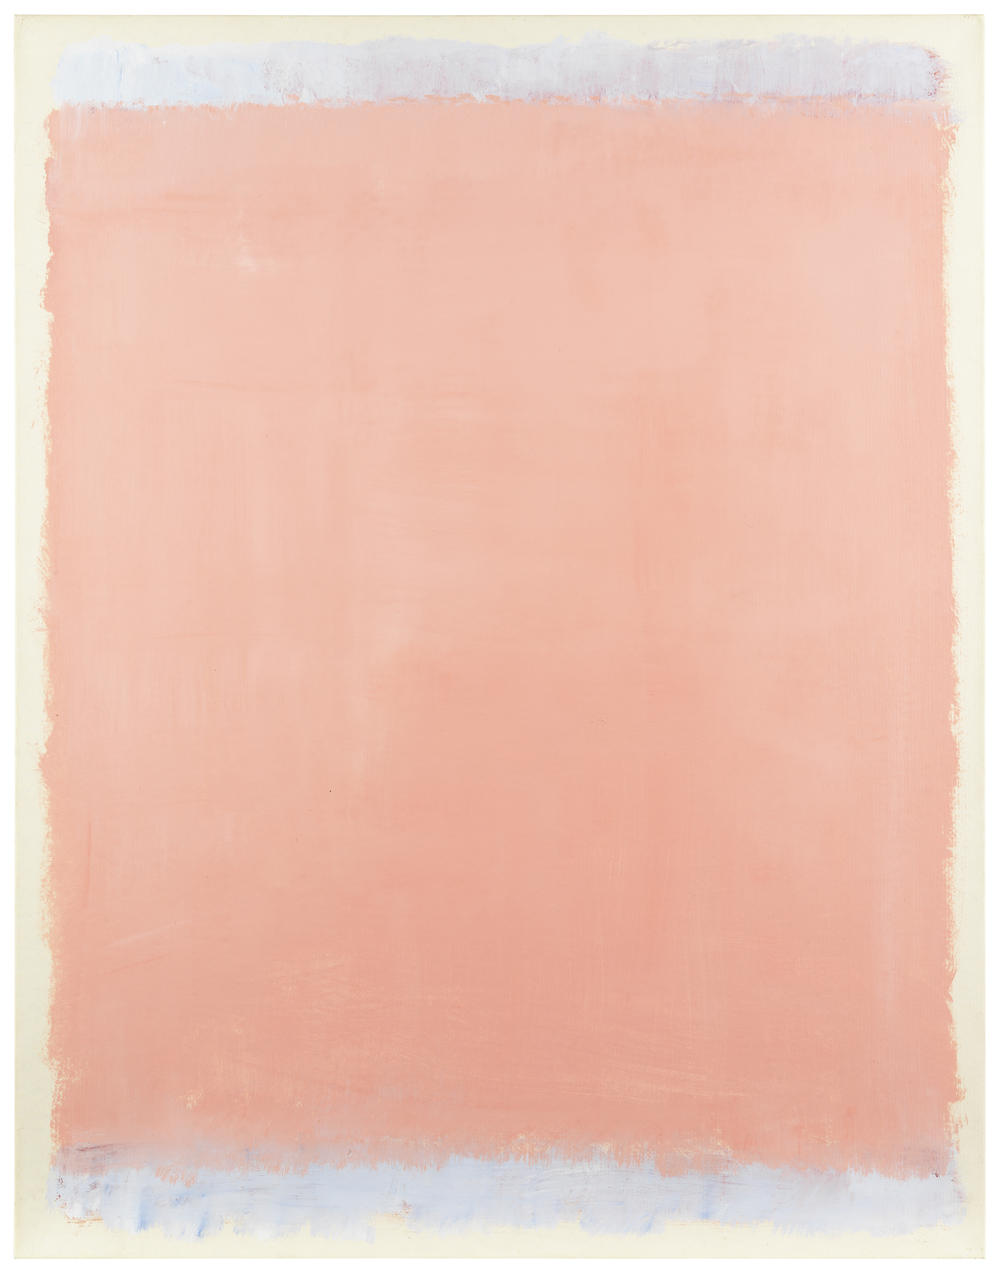 Mark Rothko,<em> Untitled</em>, 1969, acrylic on wove paper mounted on linen overall.